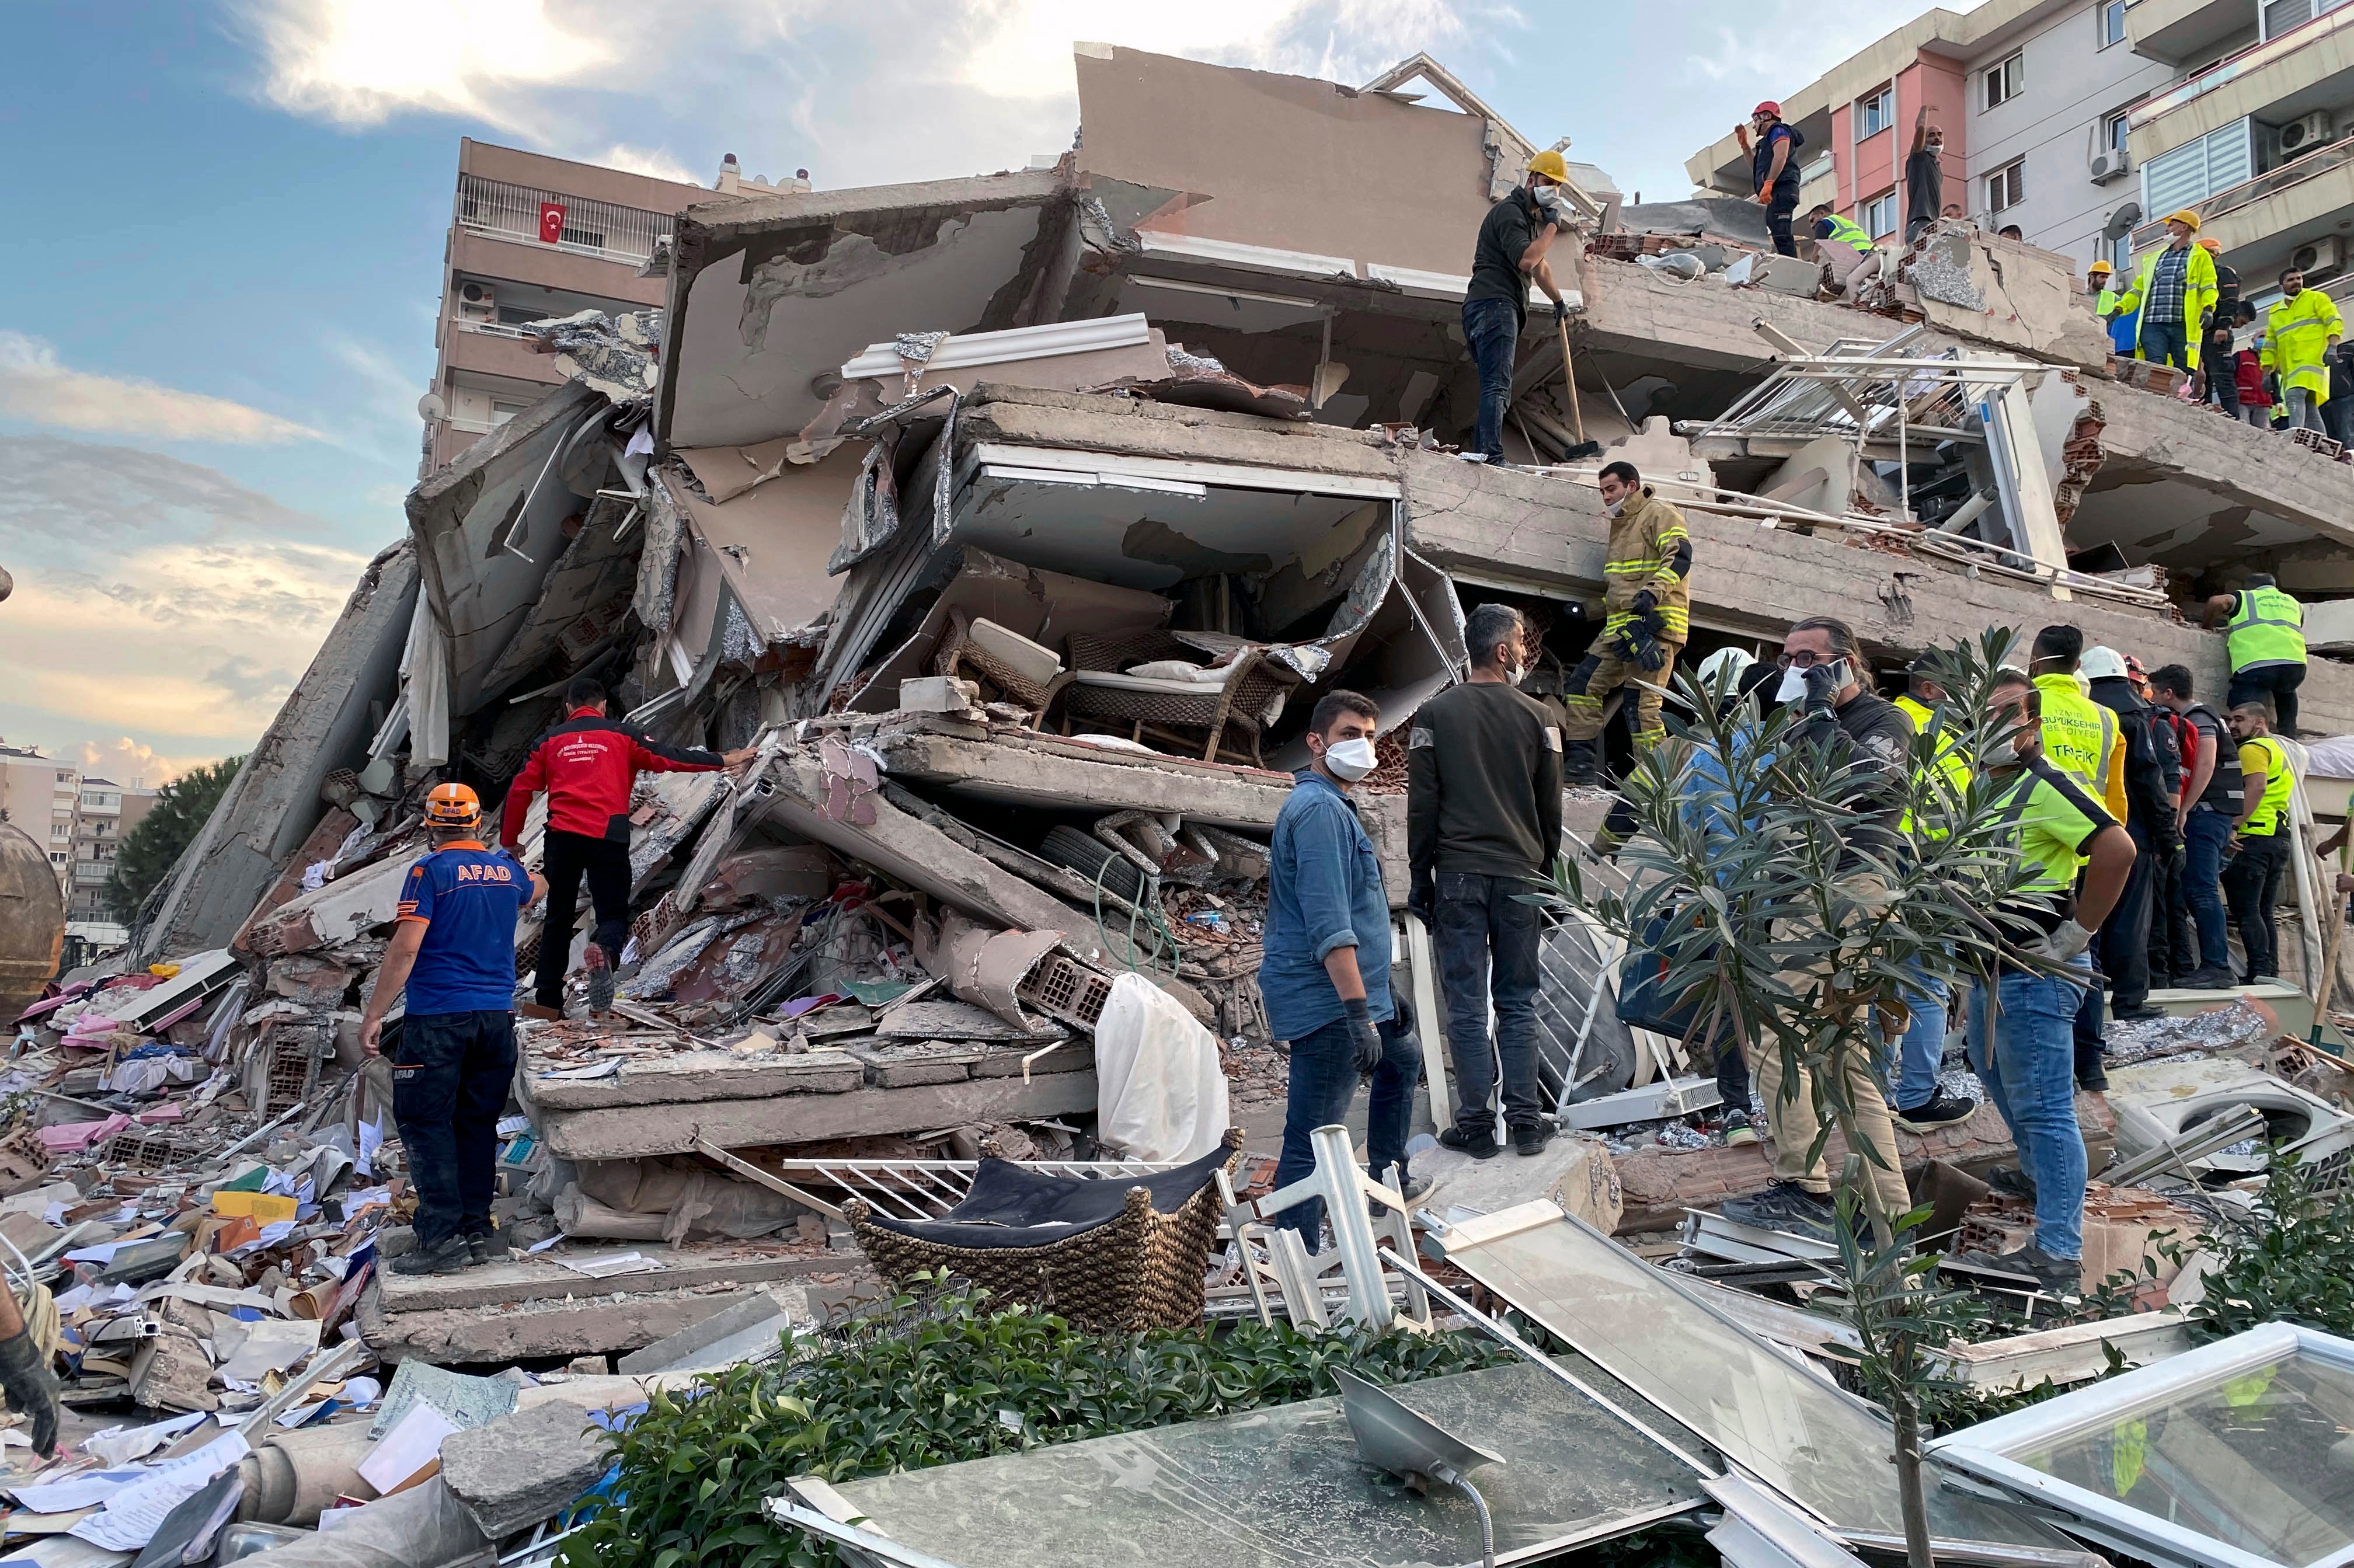 Rescue workers try to save people trapped in the debris of a collapsed building, in Izmir, Turkey, Friday, Oct. 30, 2020